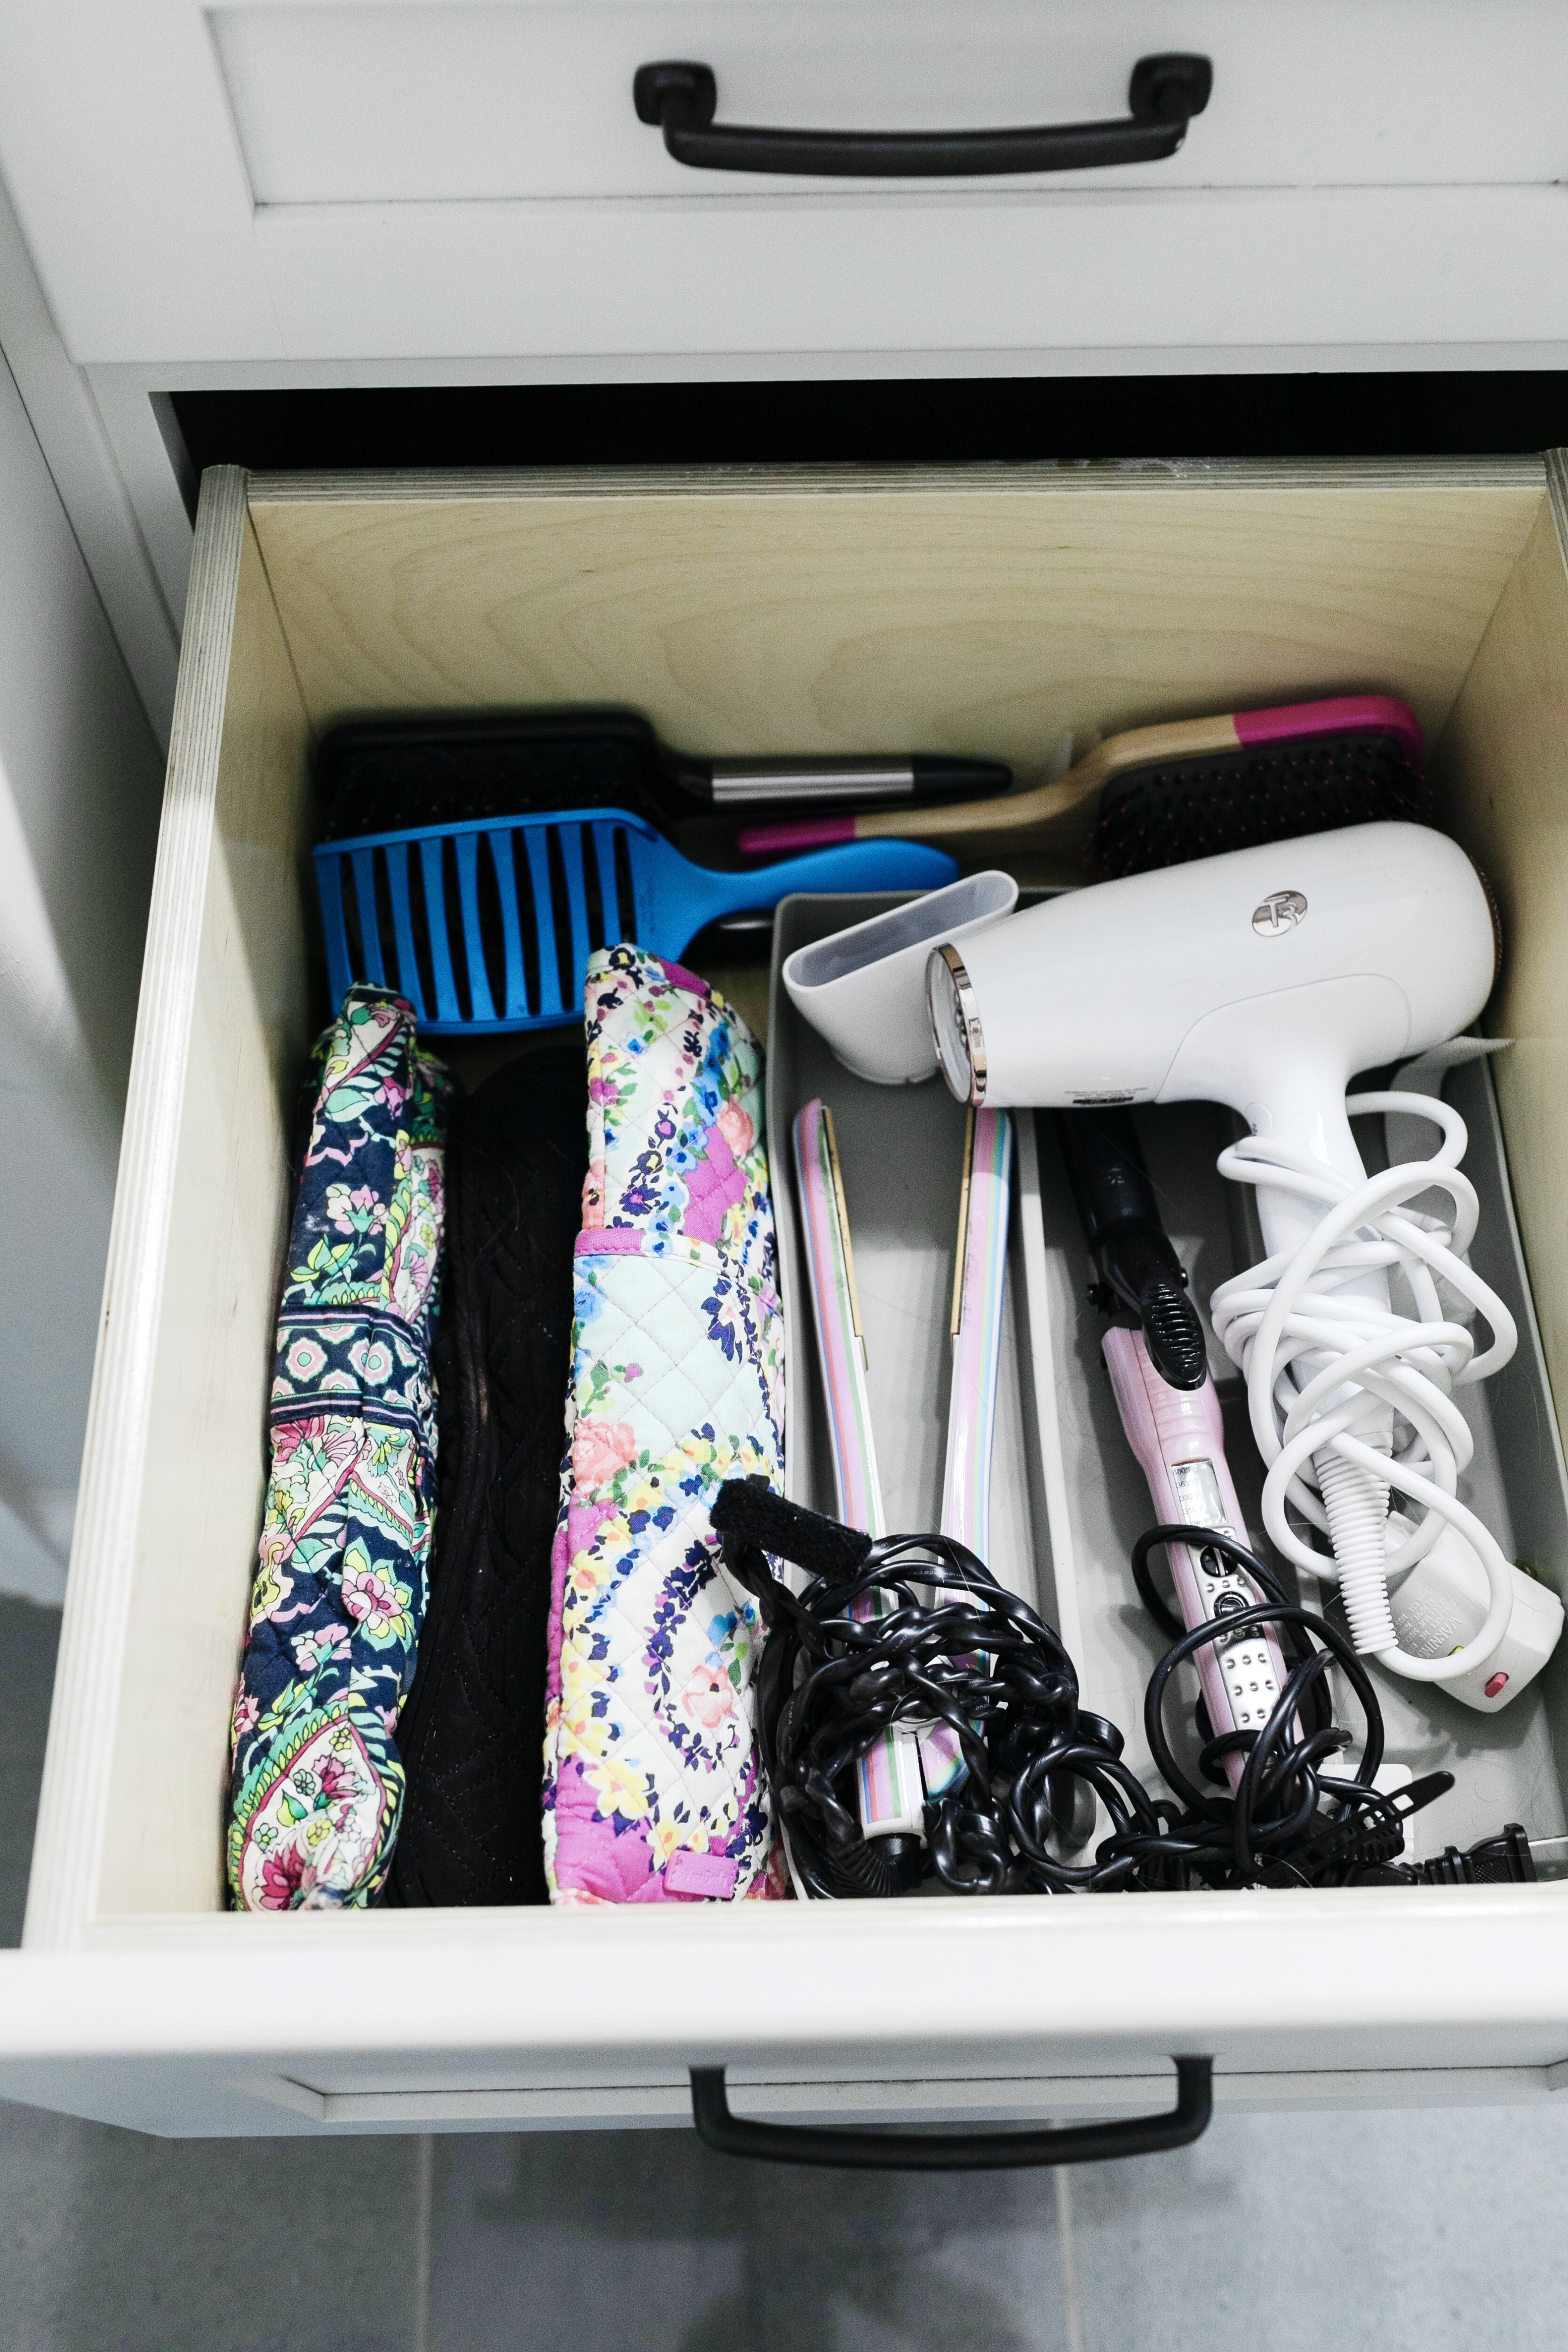 How to Organize Your Bathroom: 5 Practical Tips featured by top US lifestyle blogger, Walking in Memphis in High Heels.